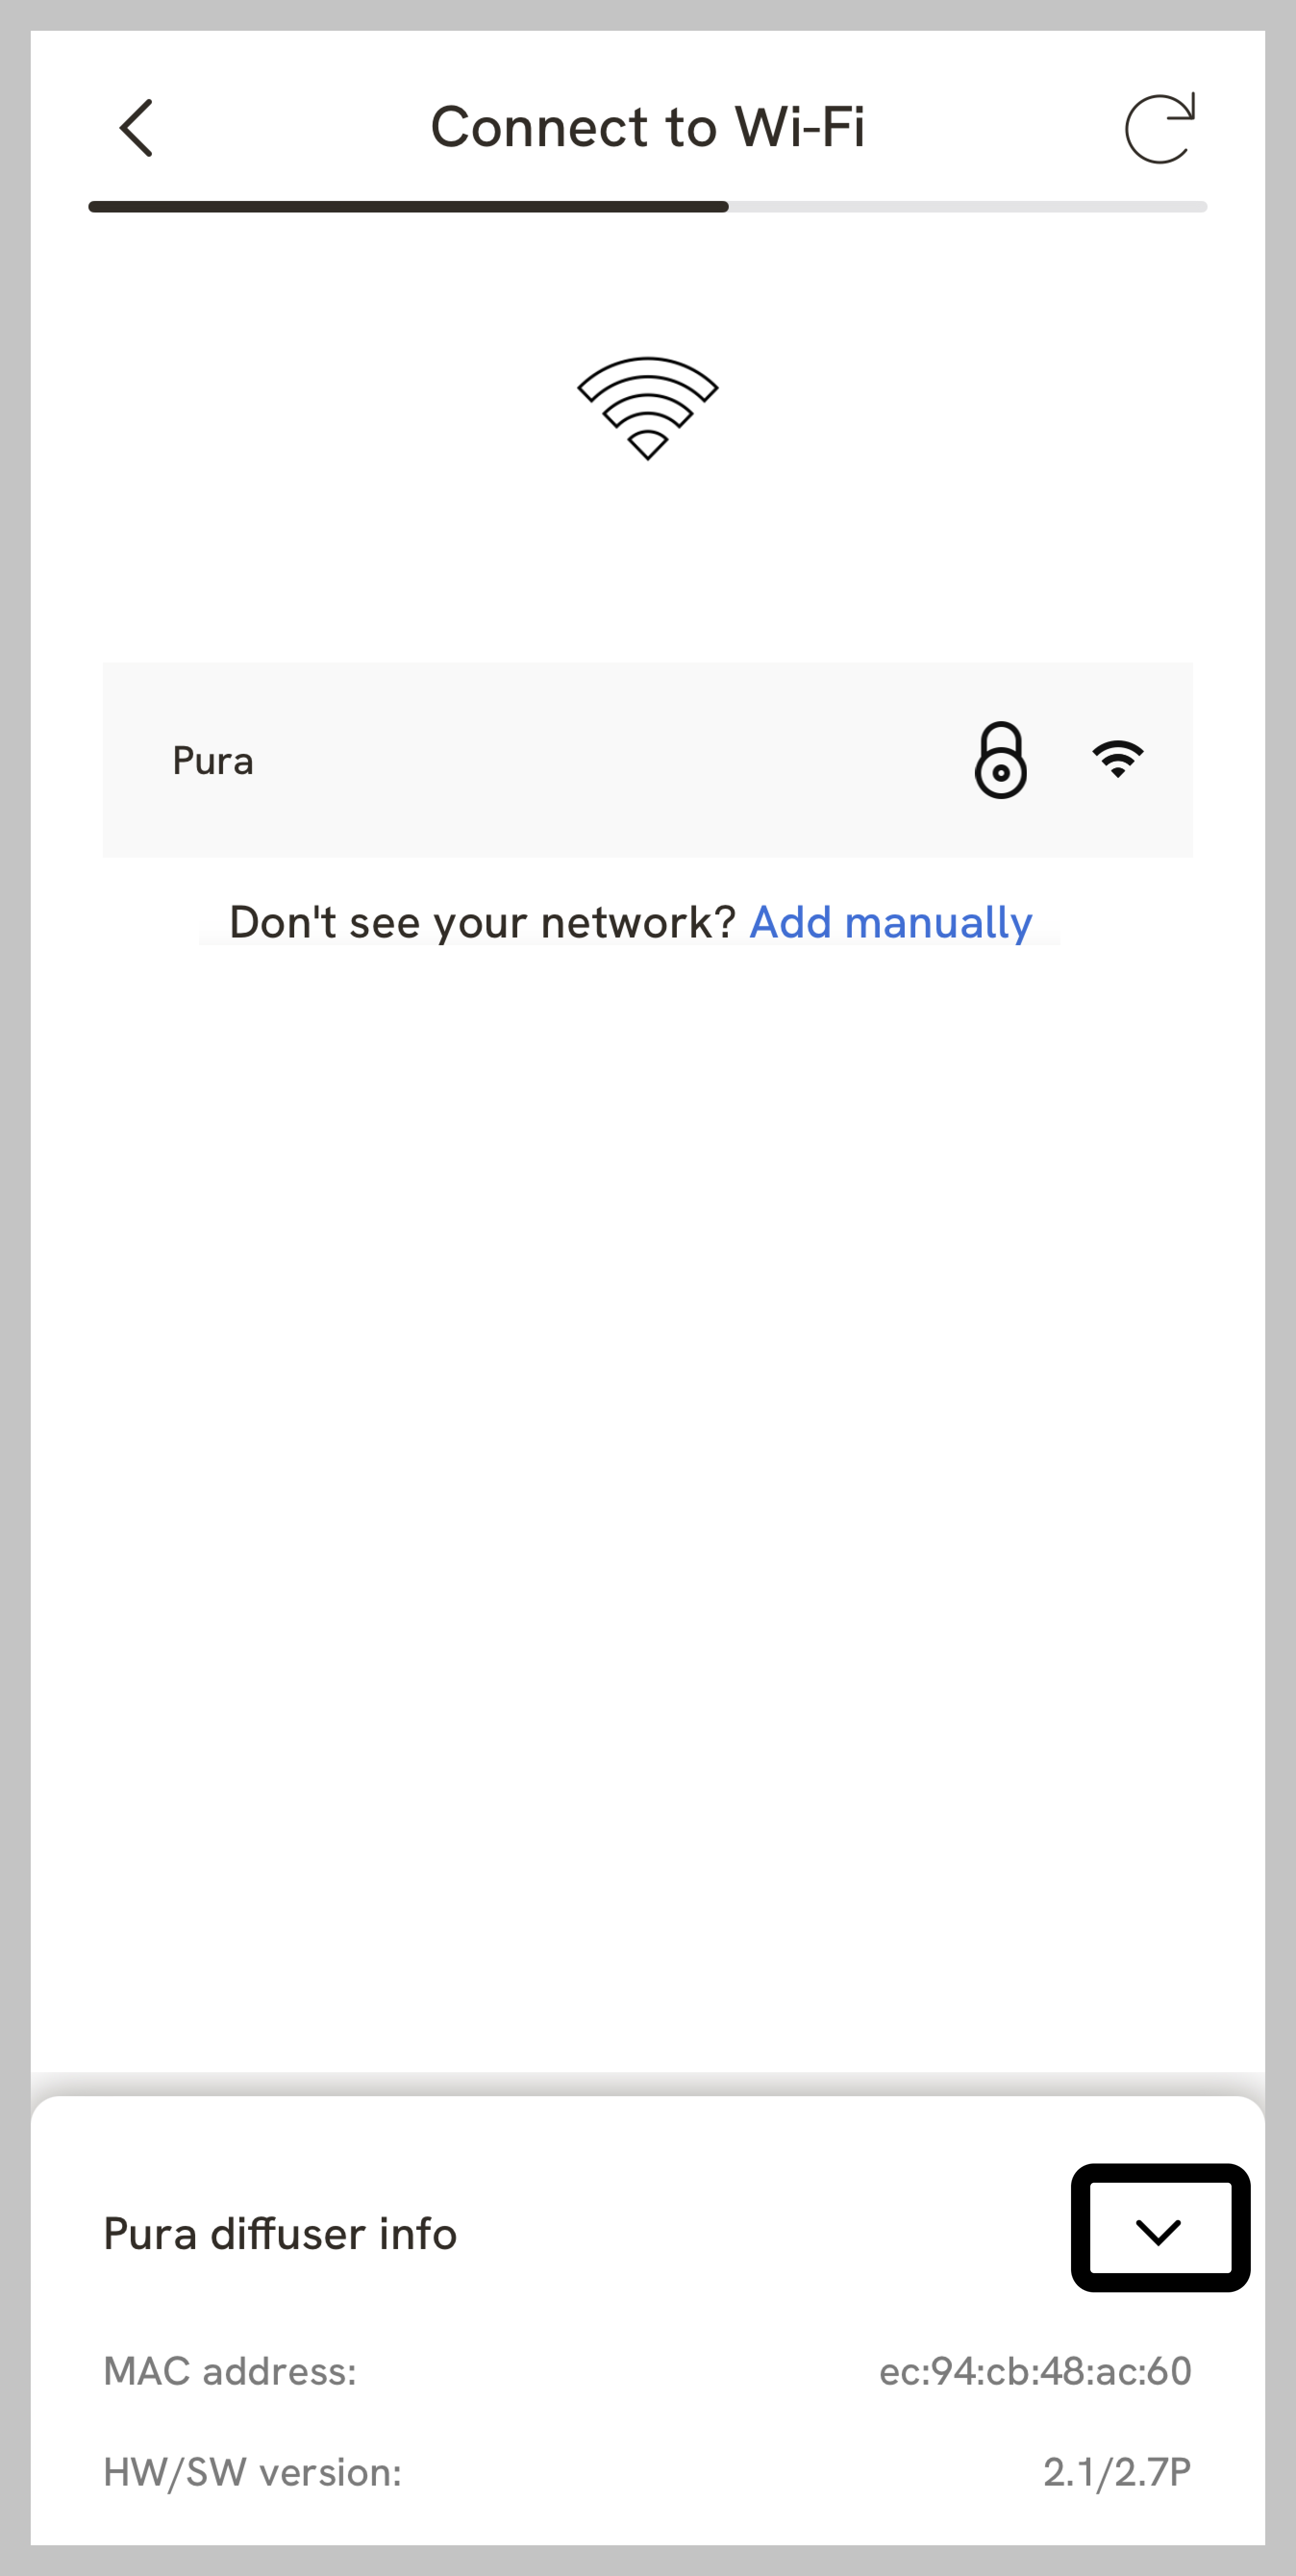 can you use pura without wifi?